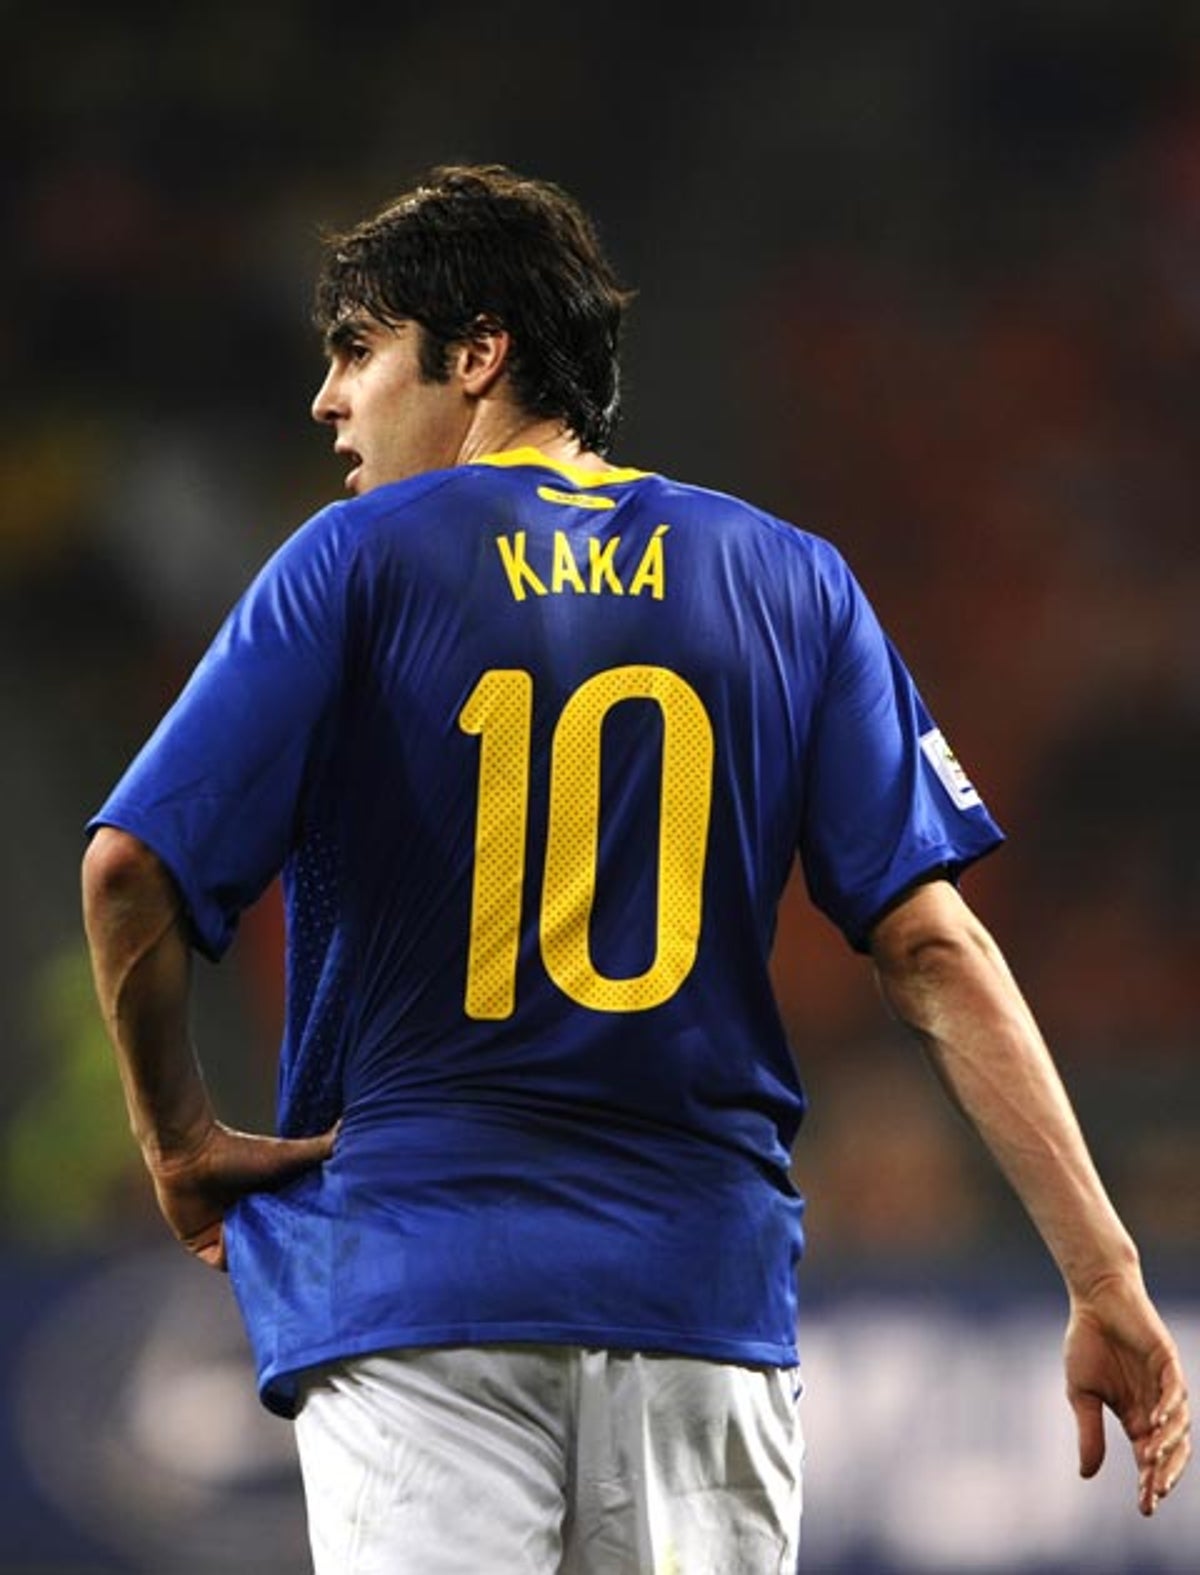 Inter Milan linked with move for Kaka | The Independent | The Independent